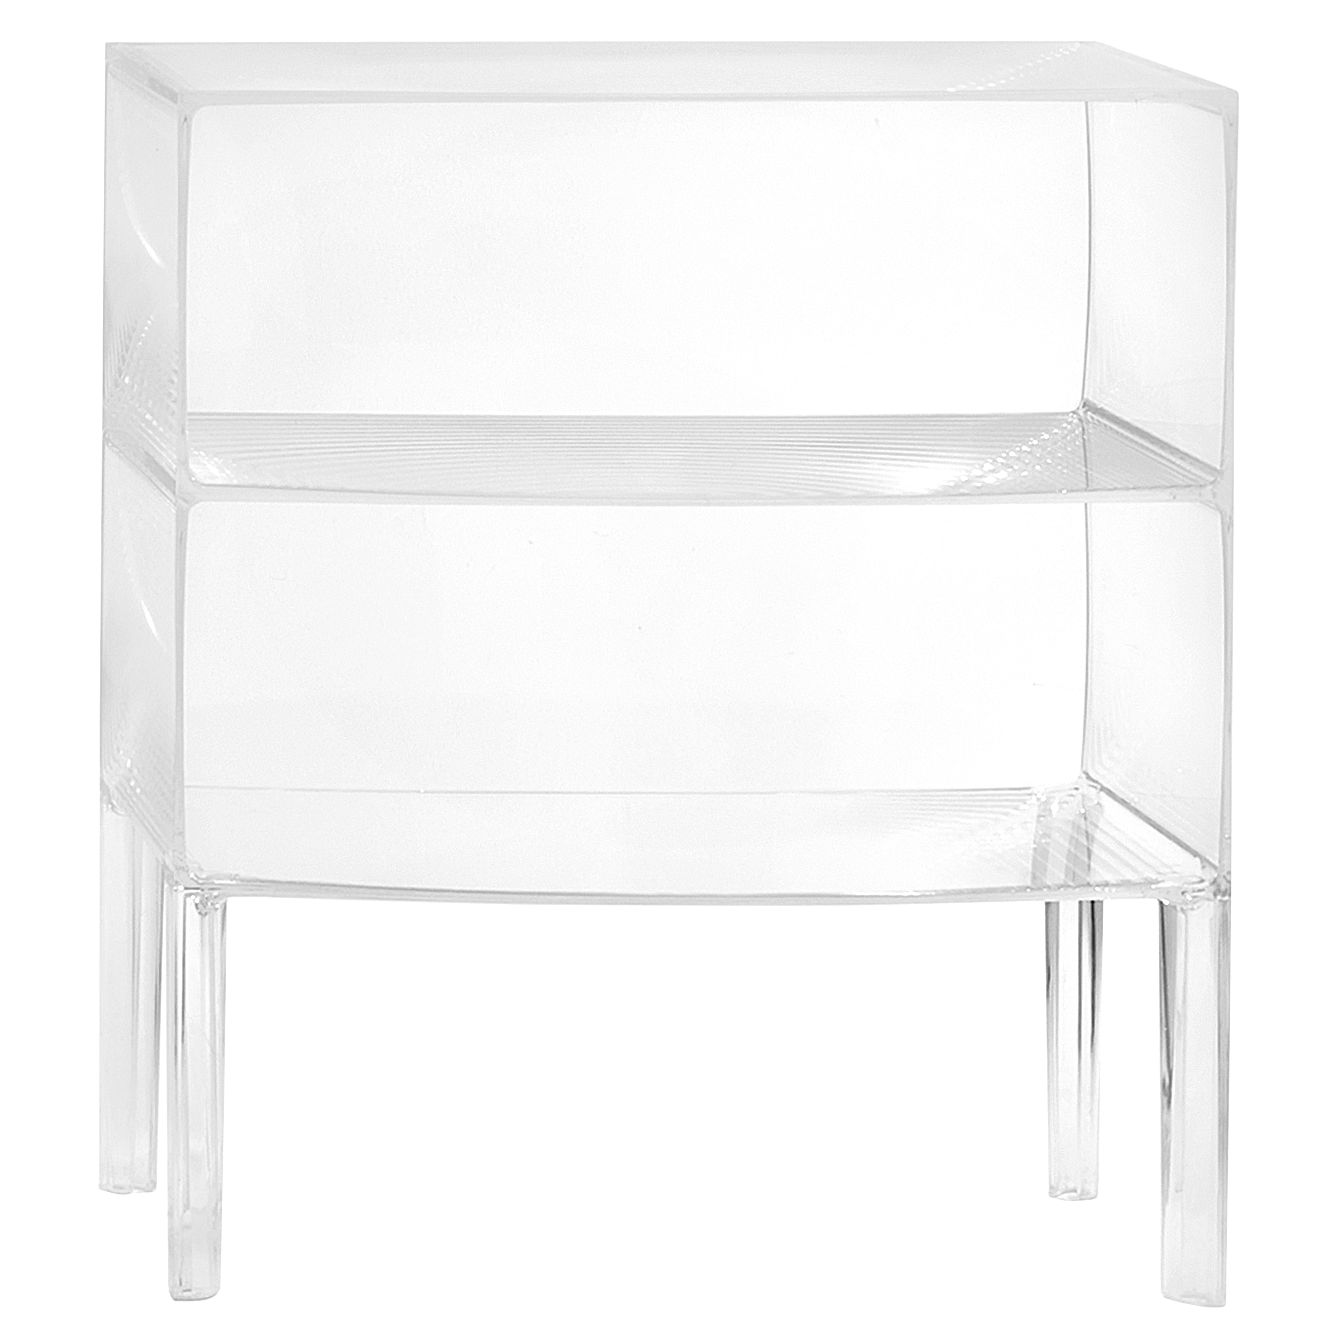 Philippe Starck for Kartell Ghost Buster Night Table, Crystal, Large at John Lewis